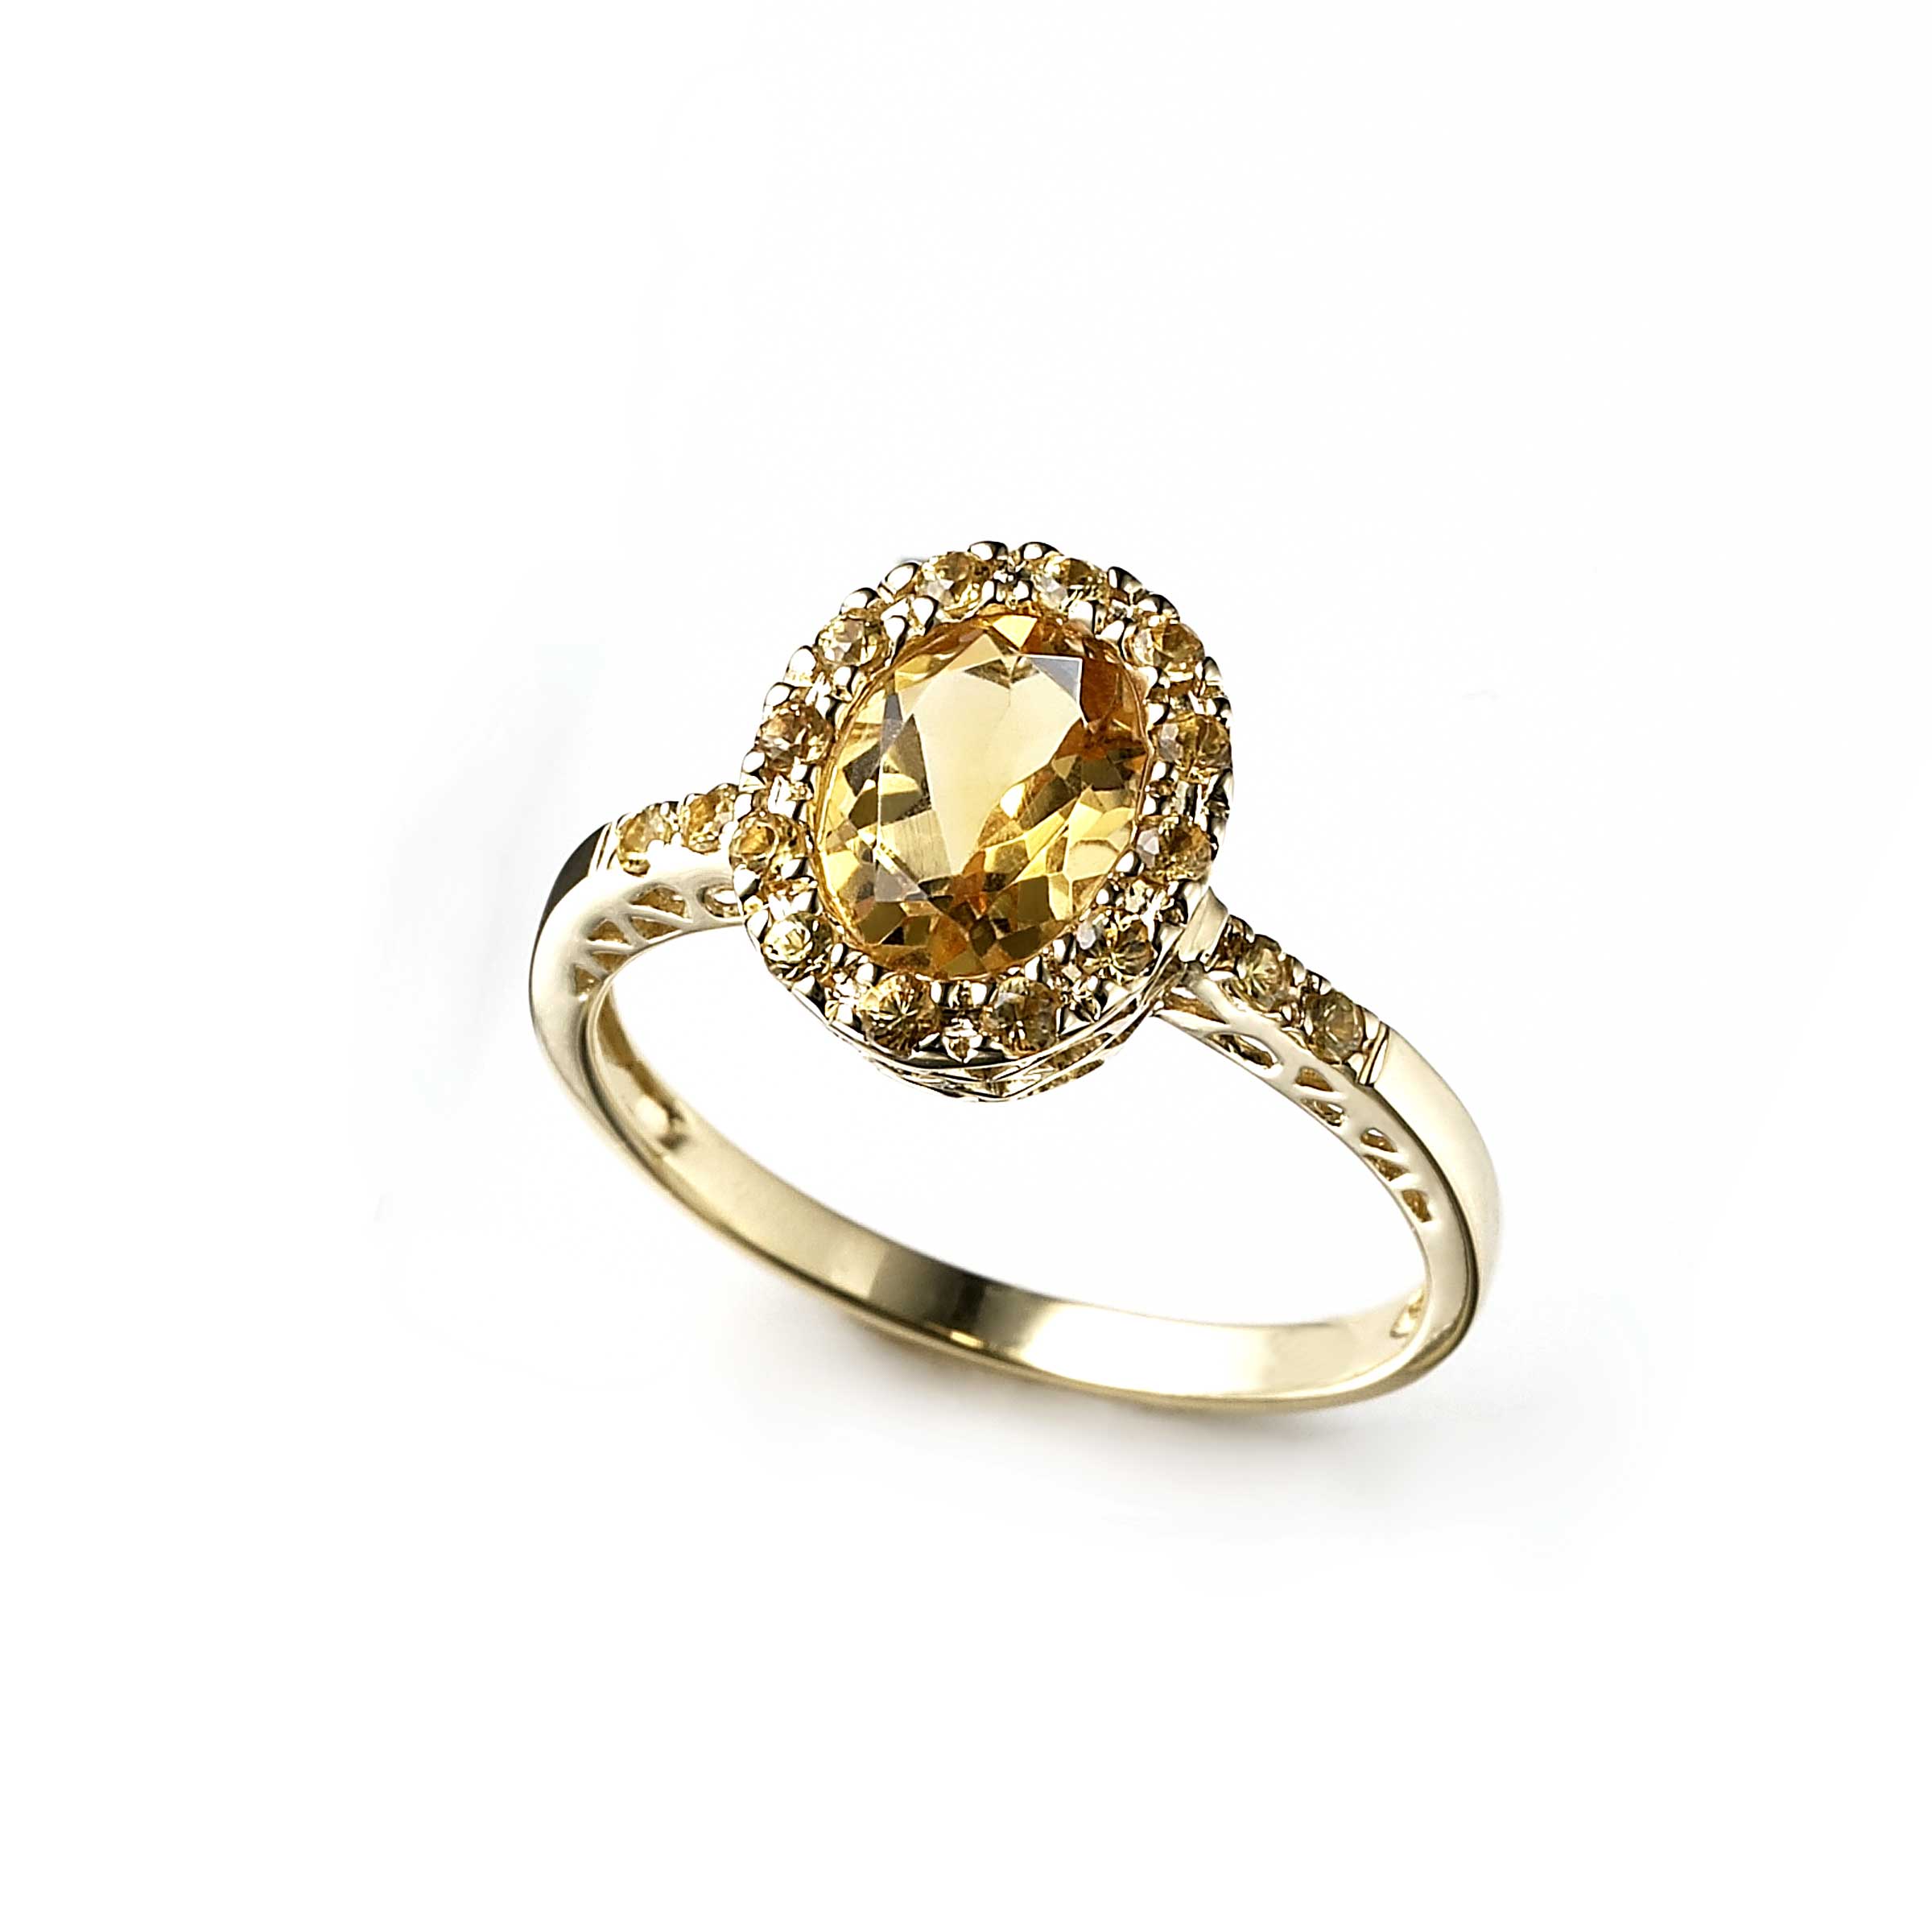 Yellow Sapphire and Diamond Ring | Schlumberger for Tiffany & Co.| 黃色剛玉  配鑽石戒指 | Magnificent Jewels | 2022 | Sotheby's